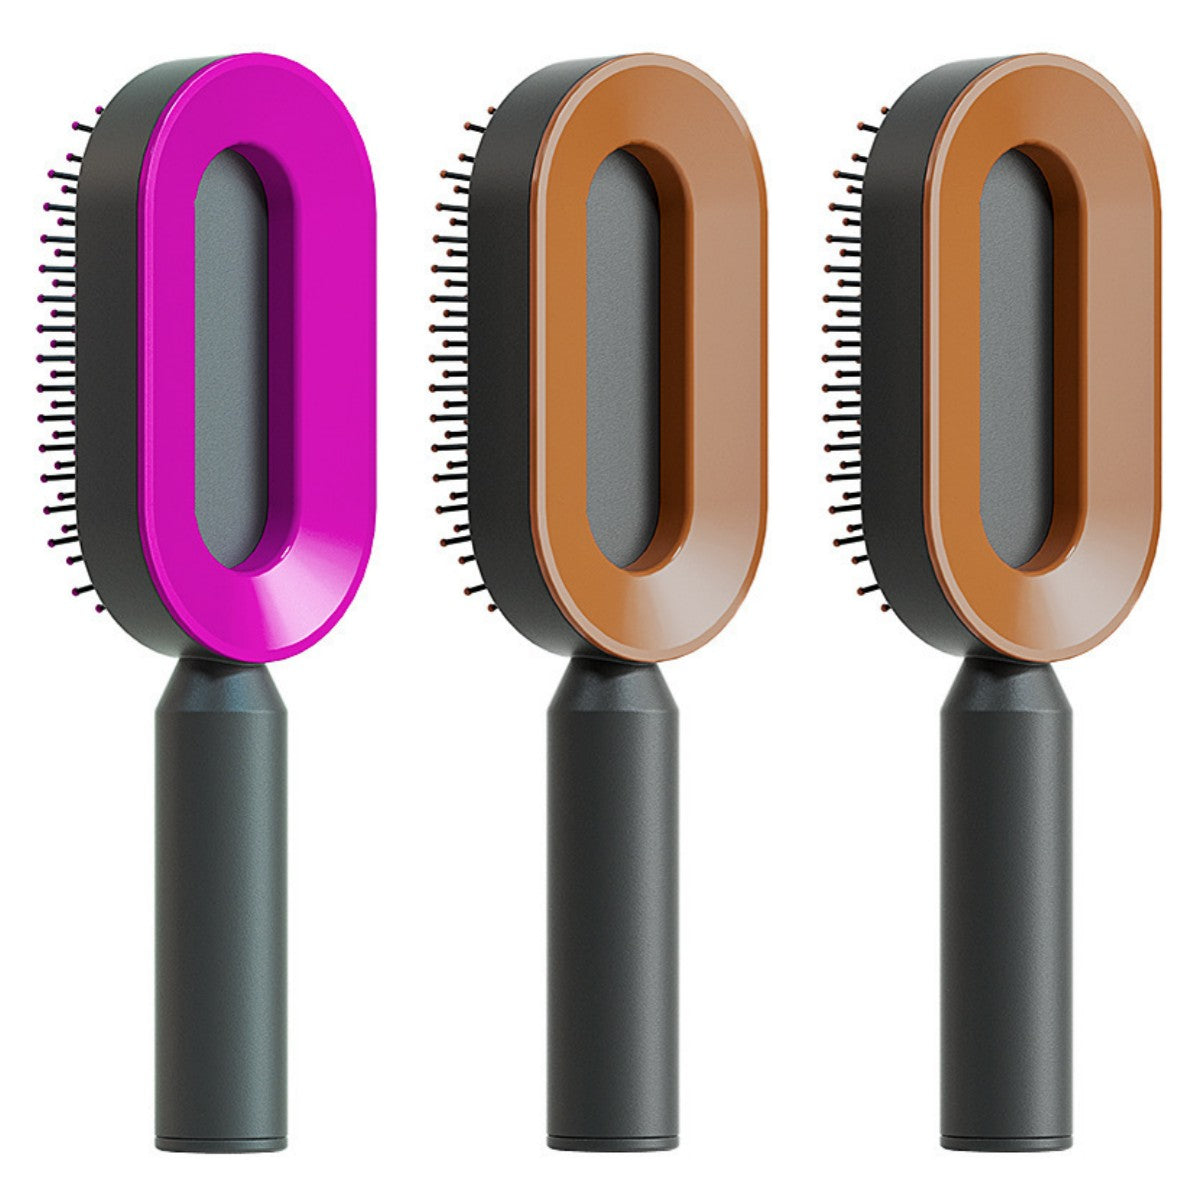 Self Cleaning Hair Brush For Women One-key Cleaning Hair Loss Airbag Massage Scalp Comb Anti-Static Hairbrush Set U